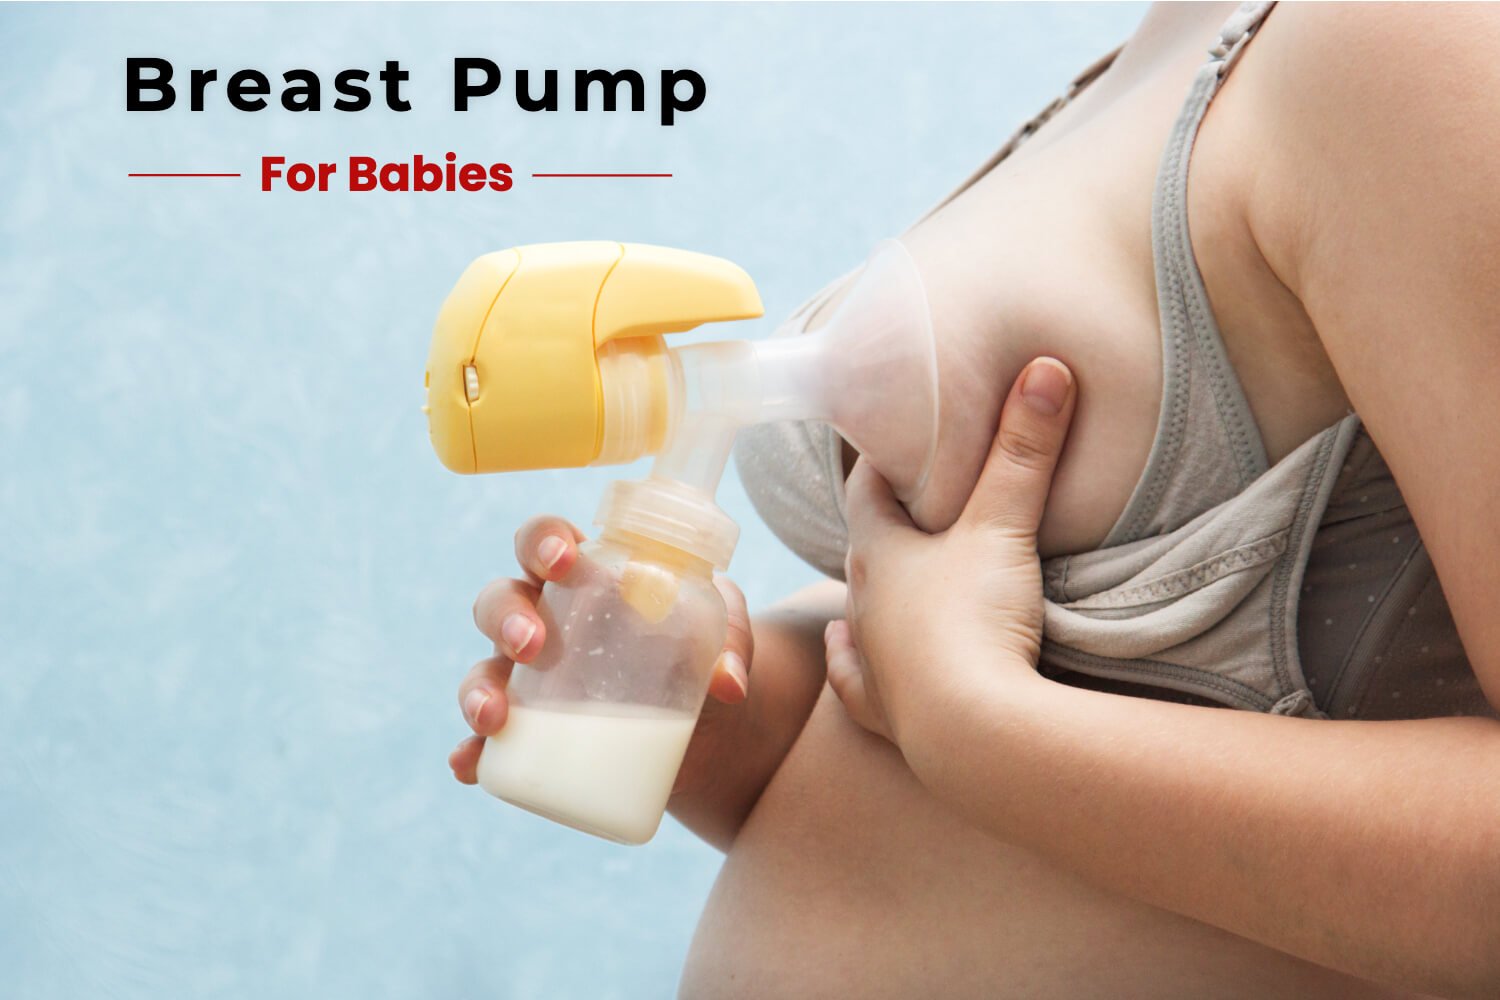 How to Choose the Right Breast Pump For Your Baby?